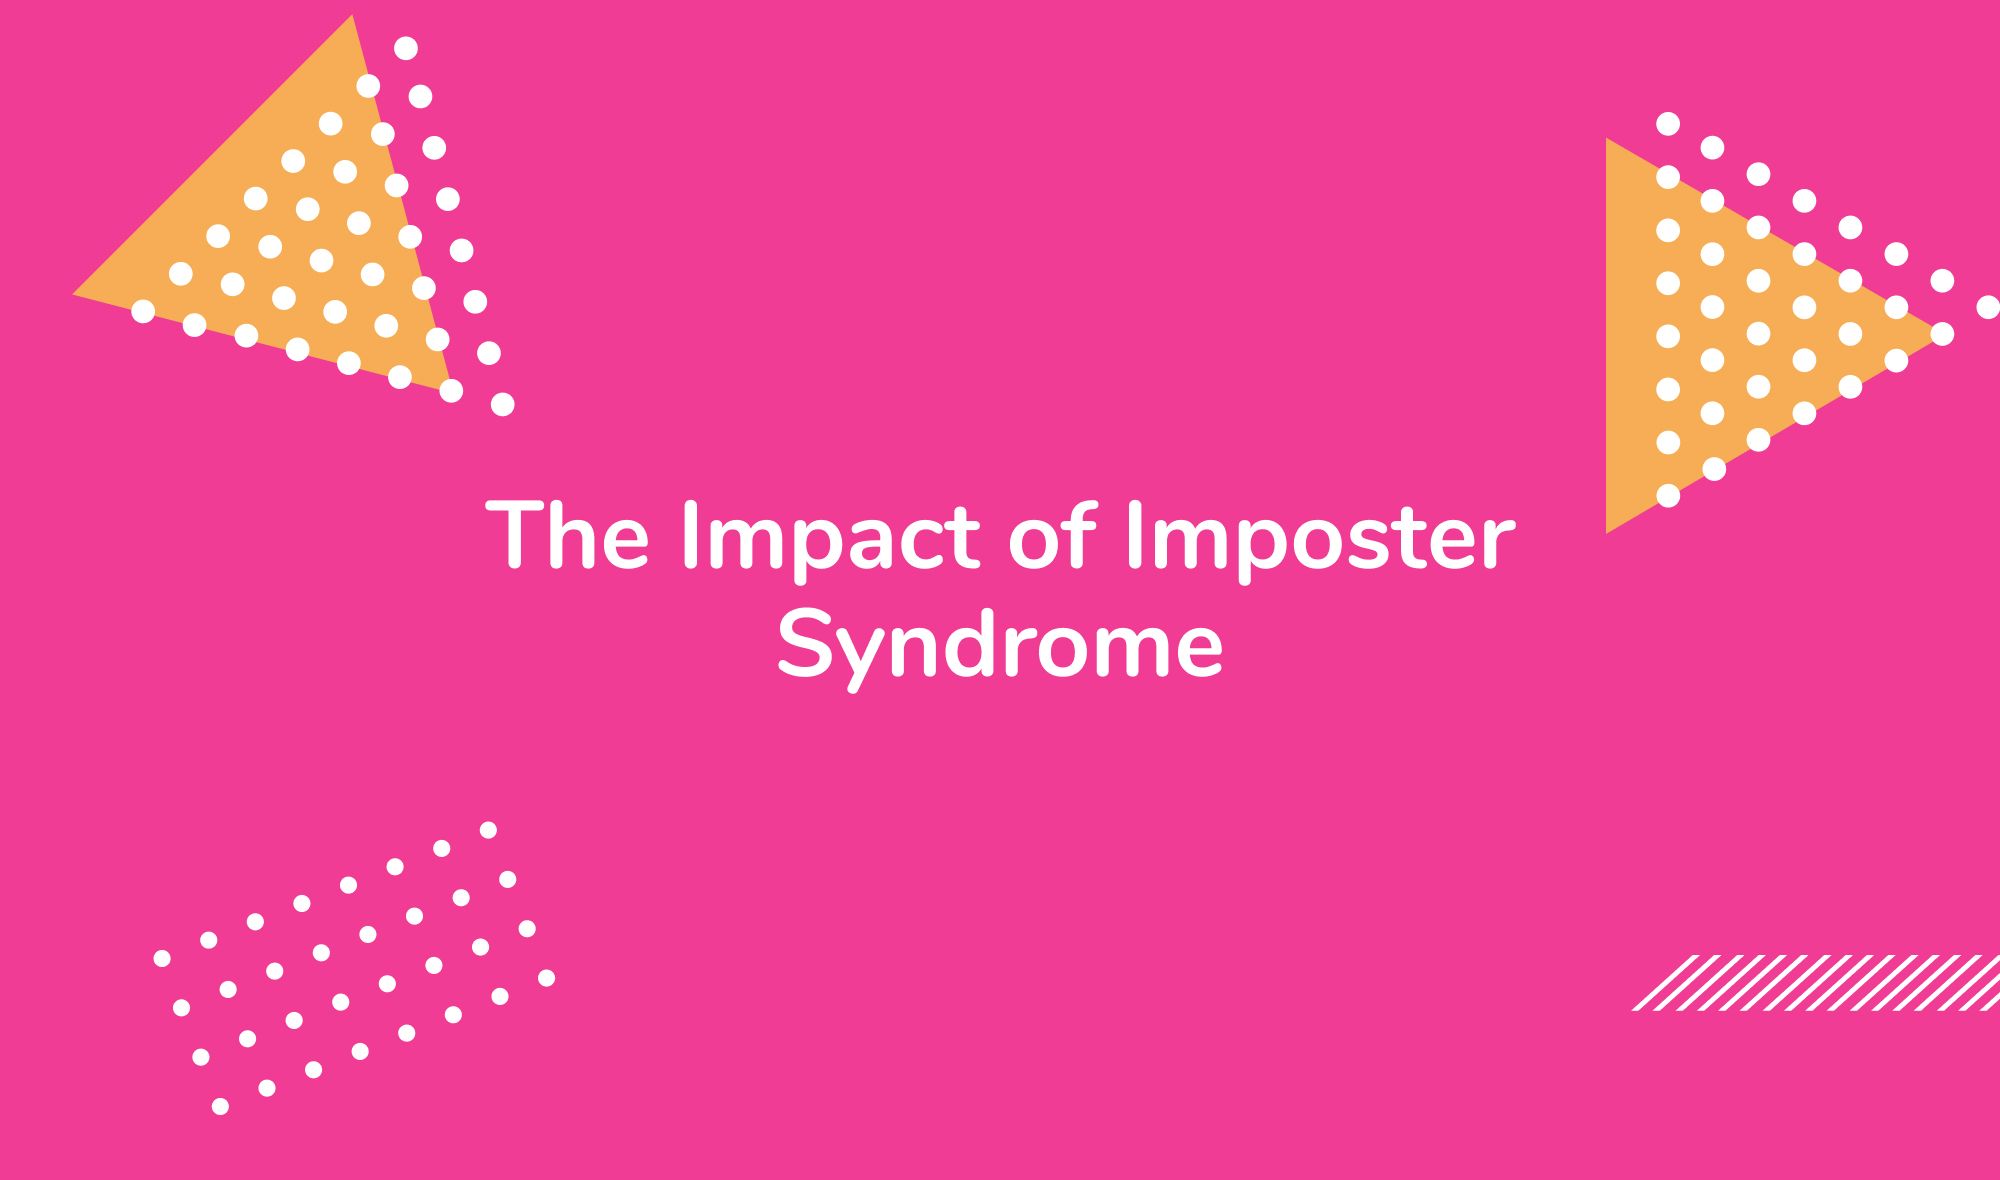 The Impact of Imposter Syndrome